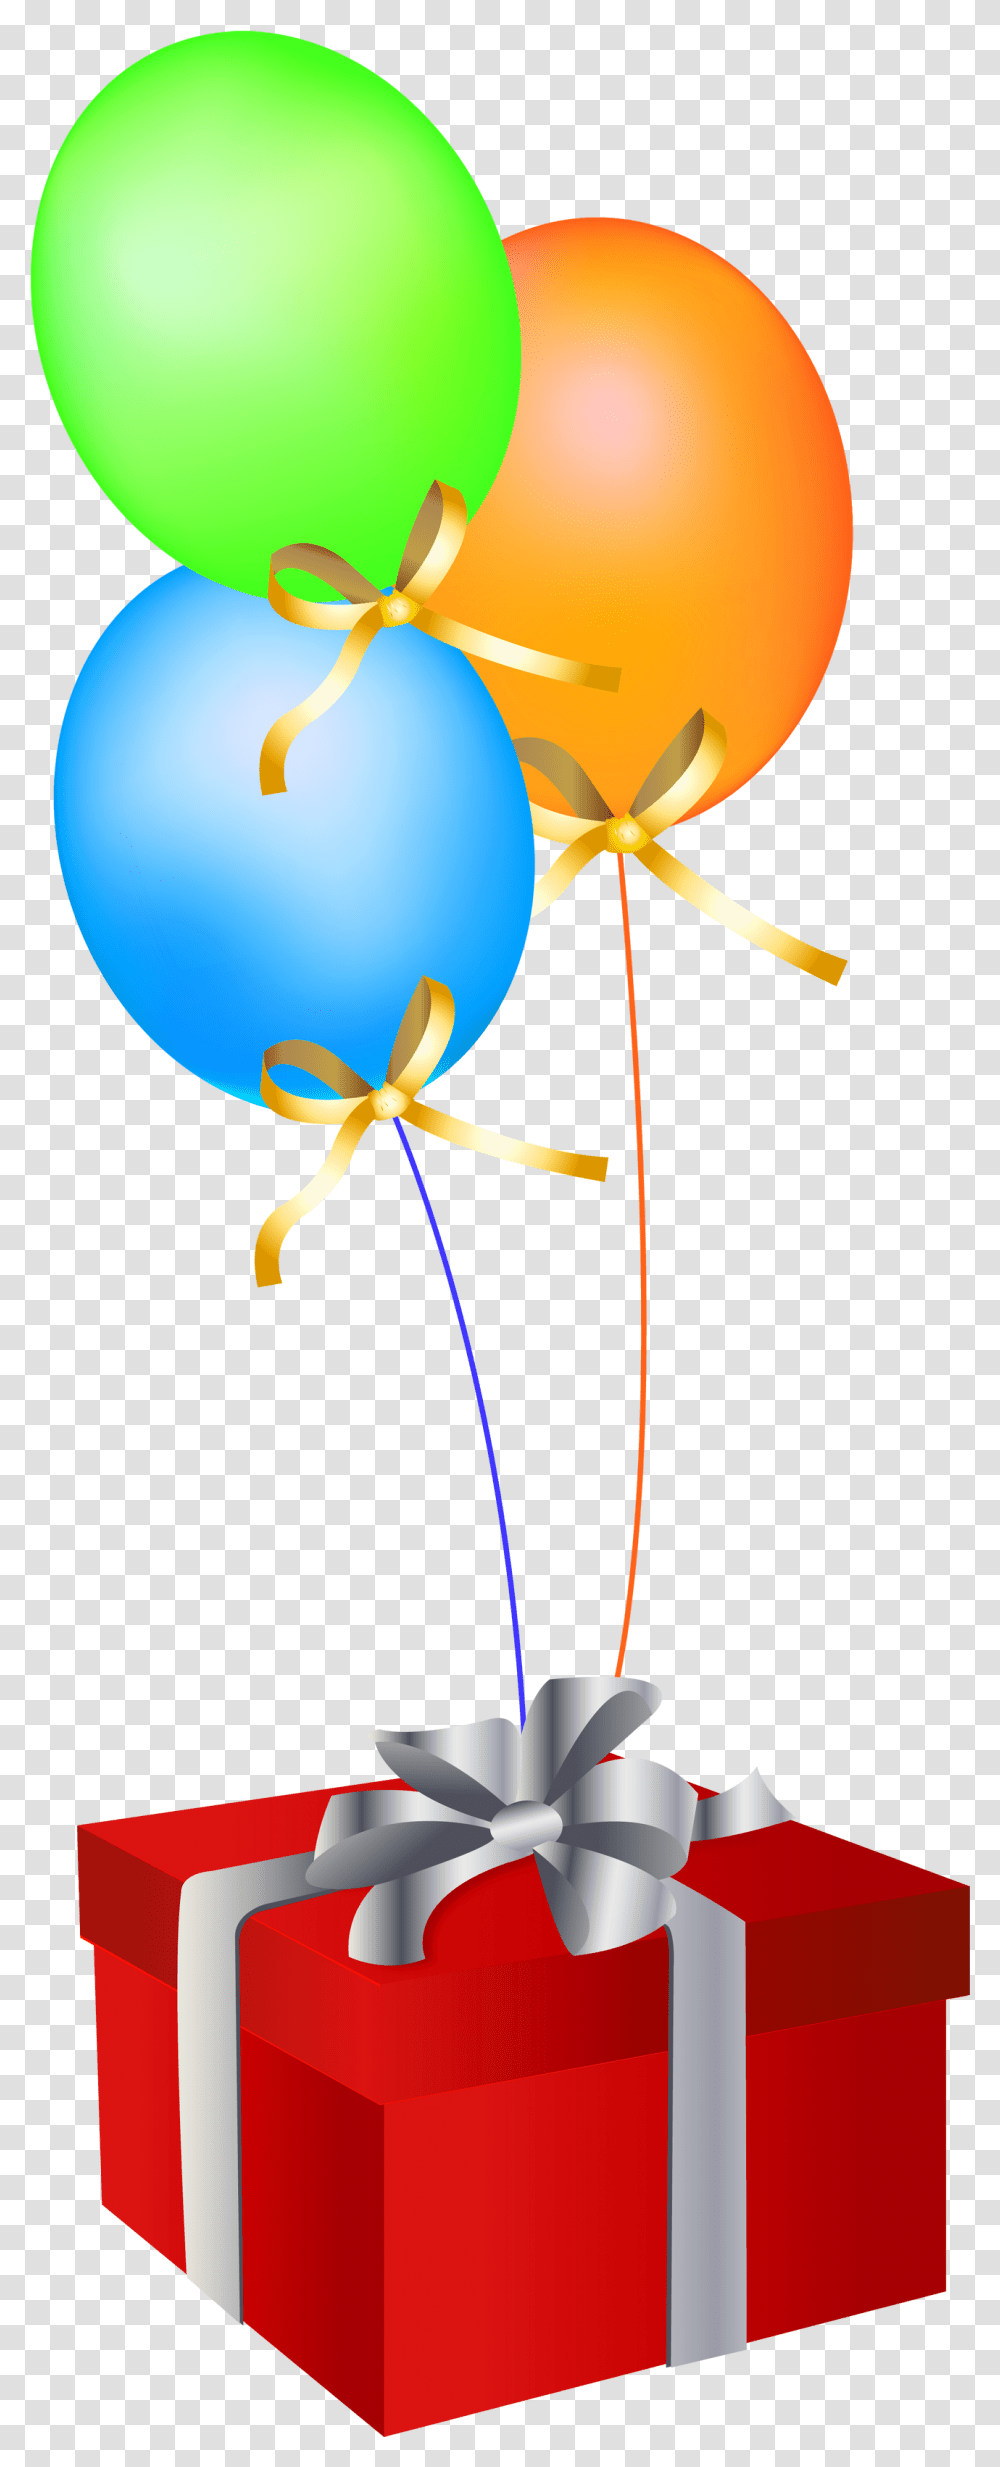 Gifts Balloons Collection Free Balloons And Gift Clipart, Rattle, Cupid Transparent Png